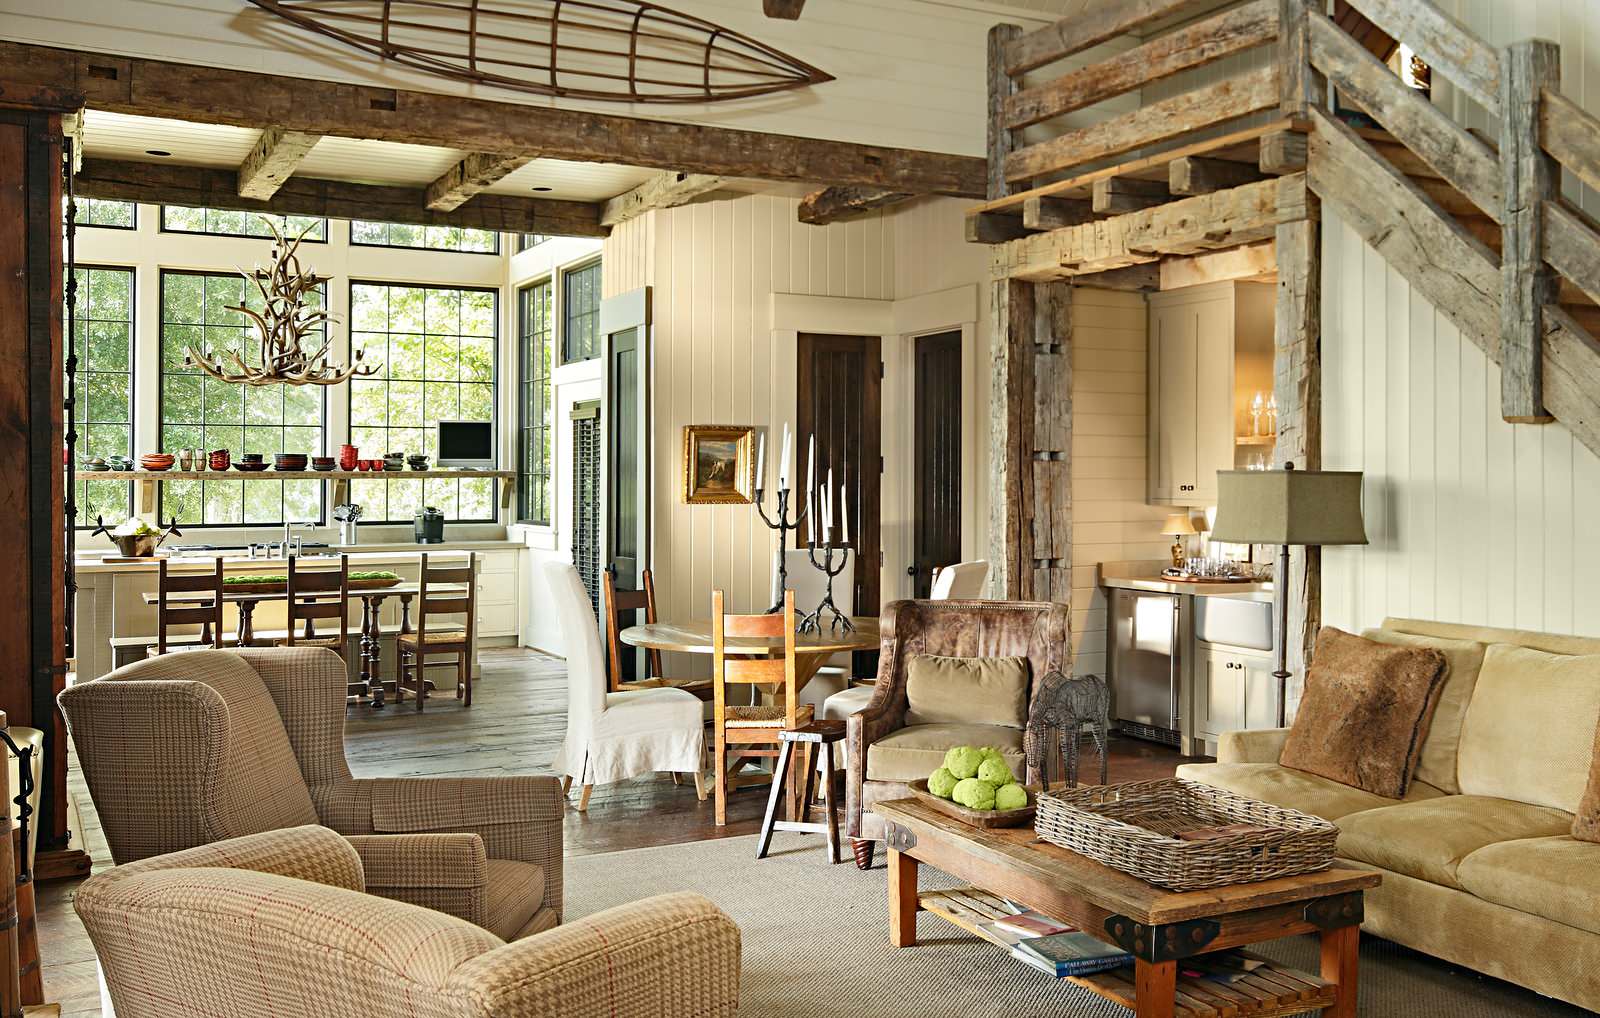 8 Tips How to Decorate with Reclaimed Wood